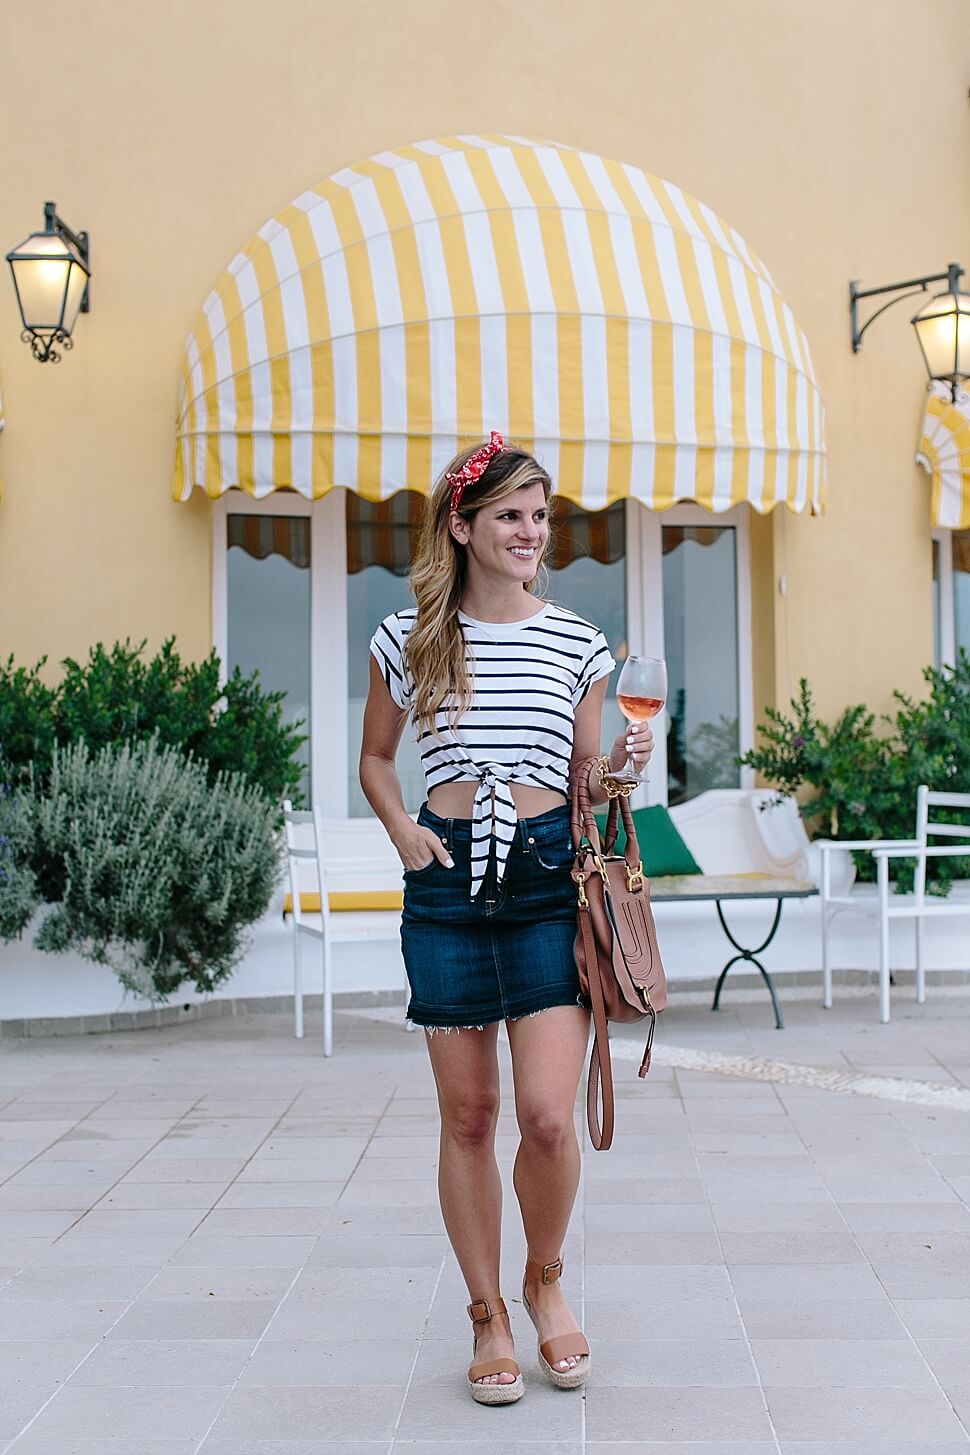 brighton keller wearing denim mini skirt with striped, cropped tie-front tee and espadrilles